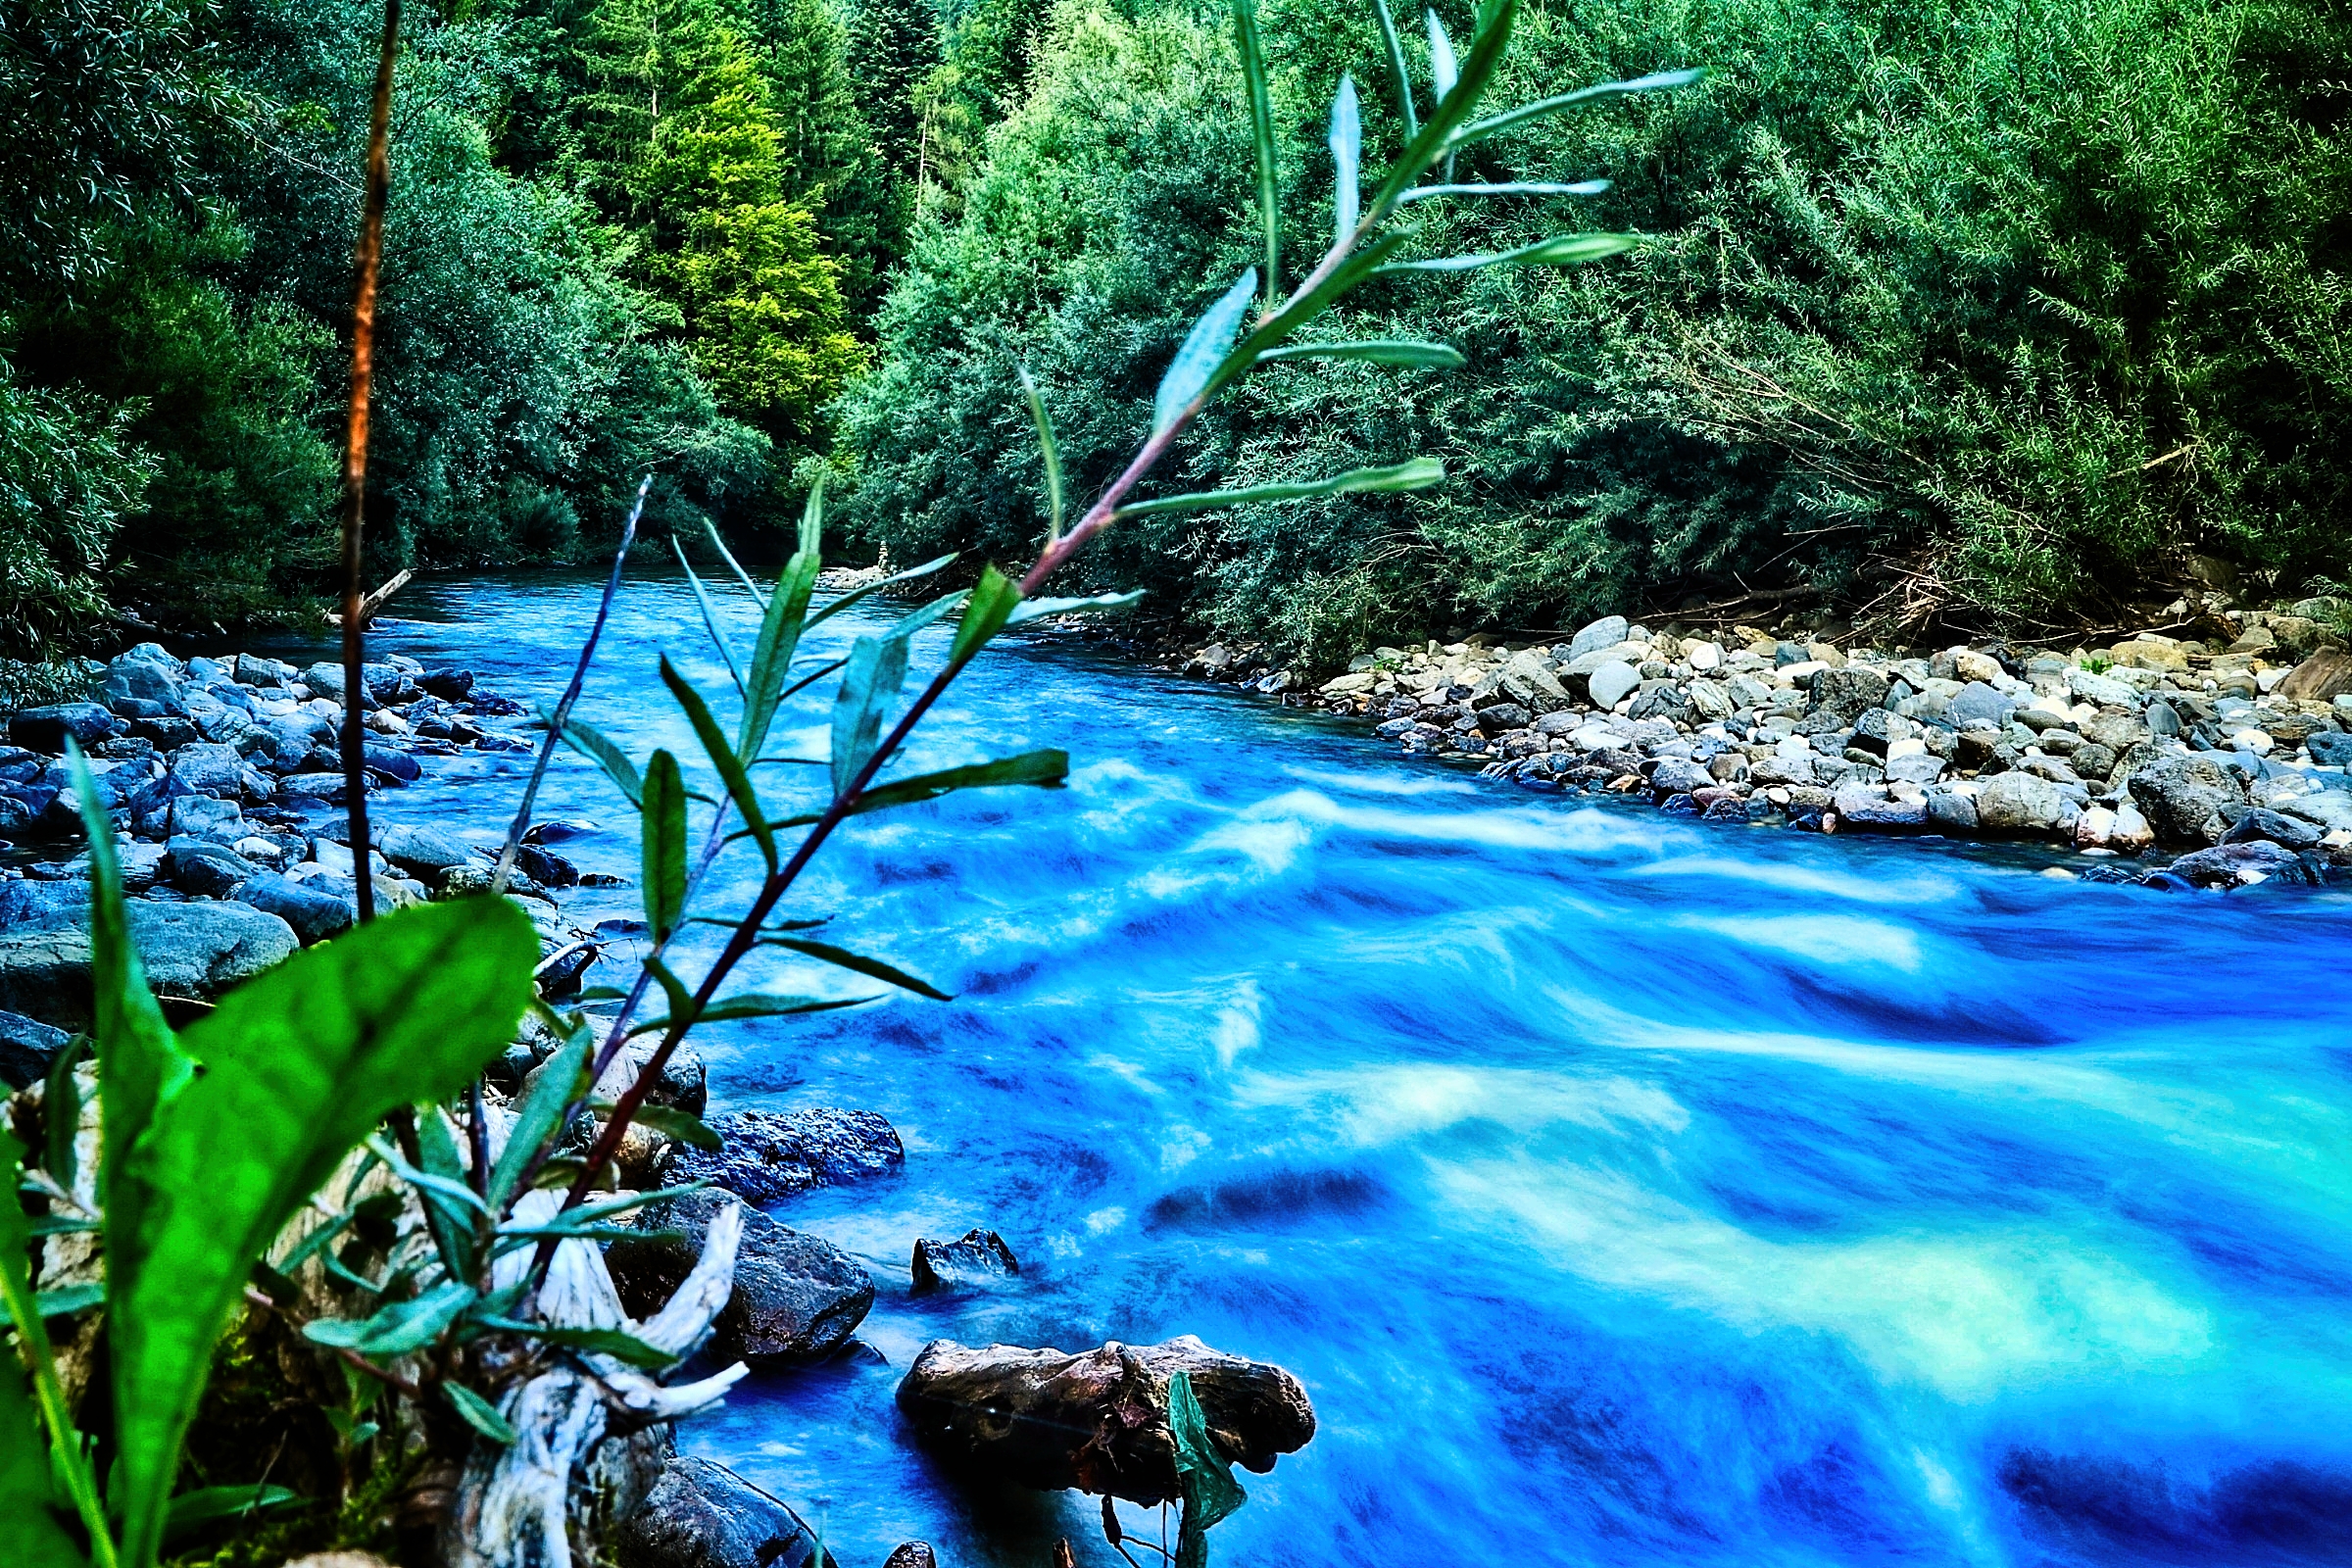 General 2400x1600 HDR river water nature outdoors trees photography rocks